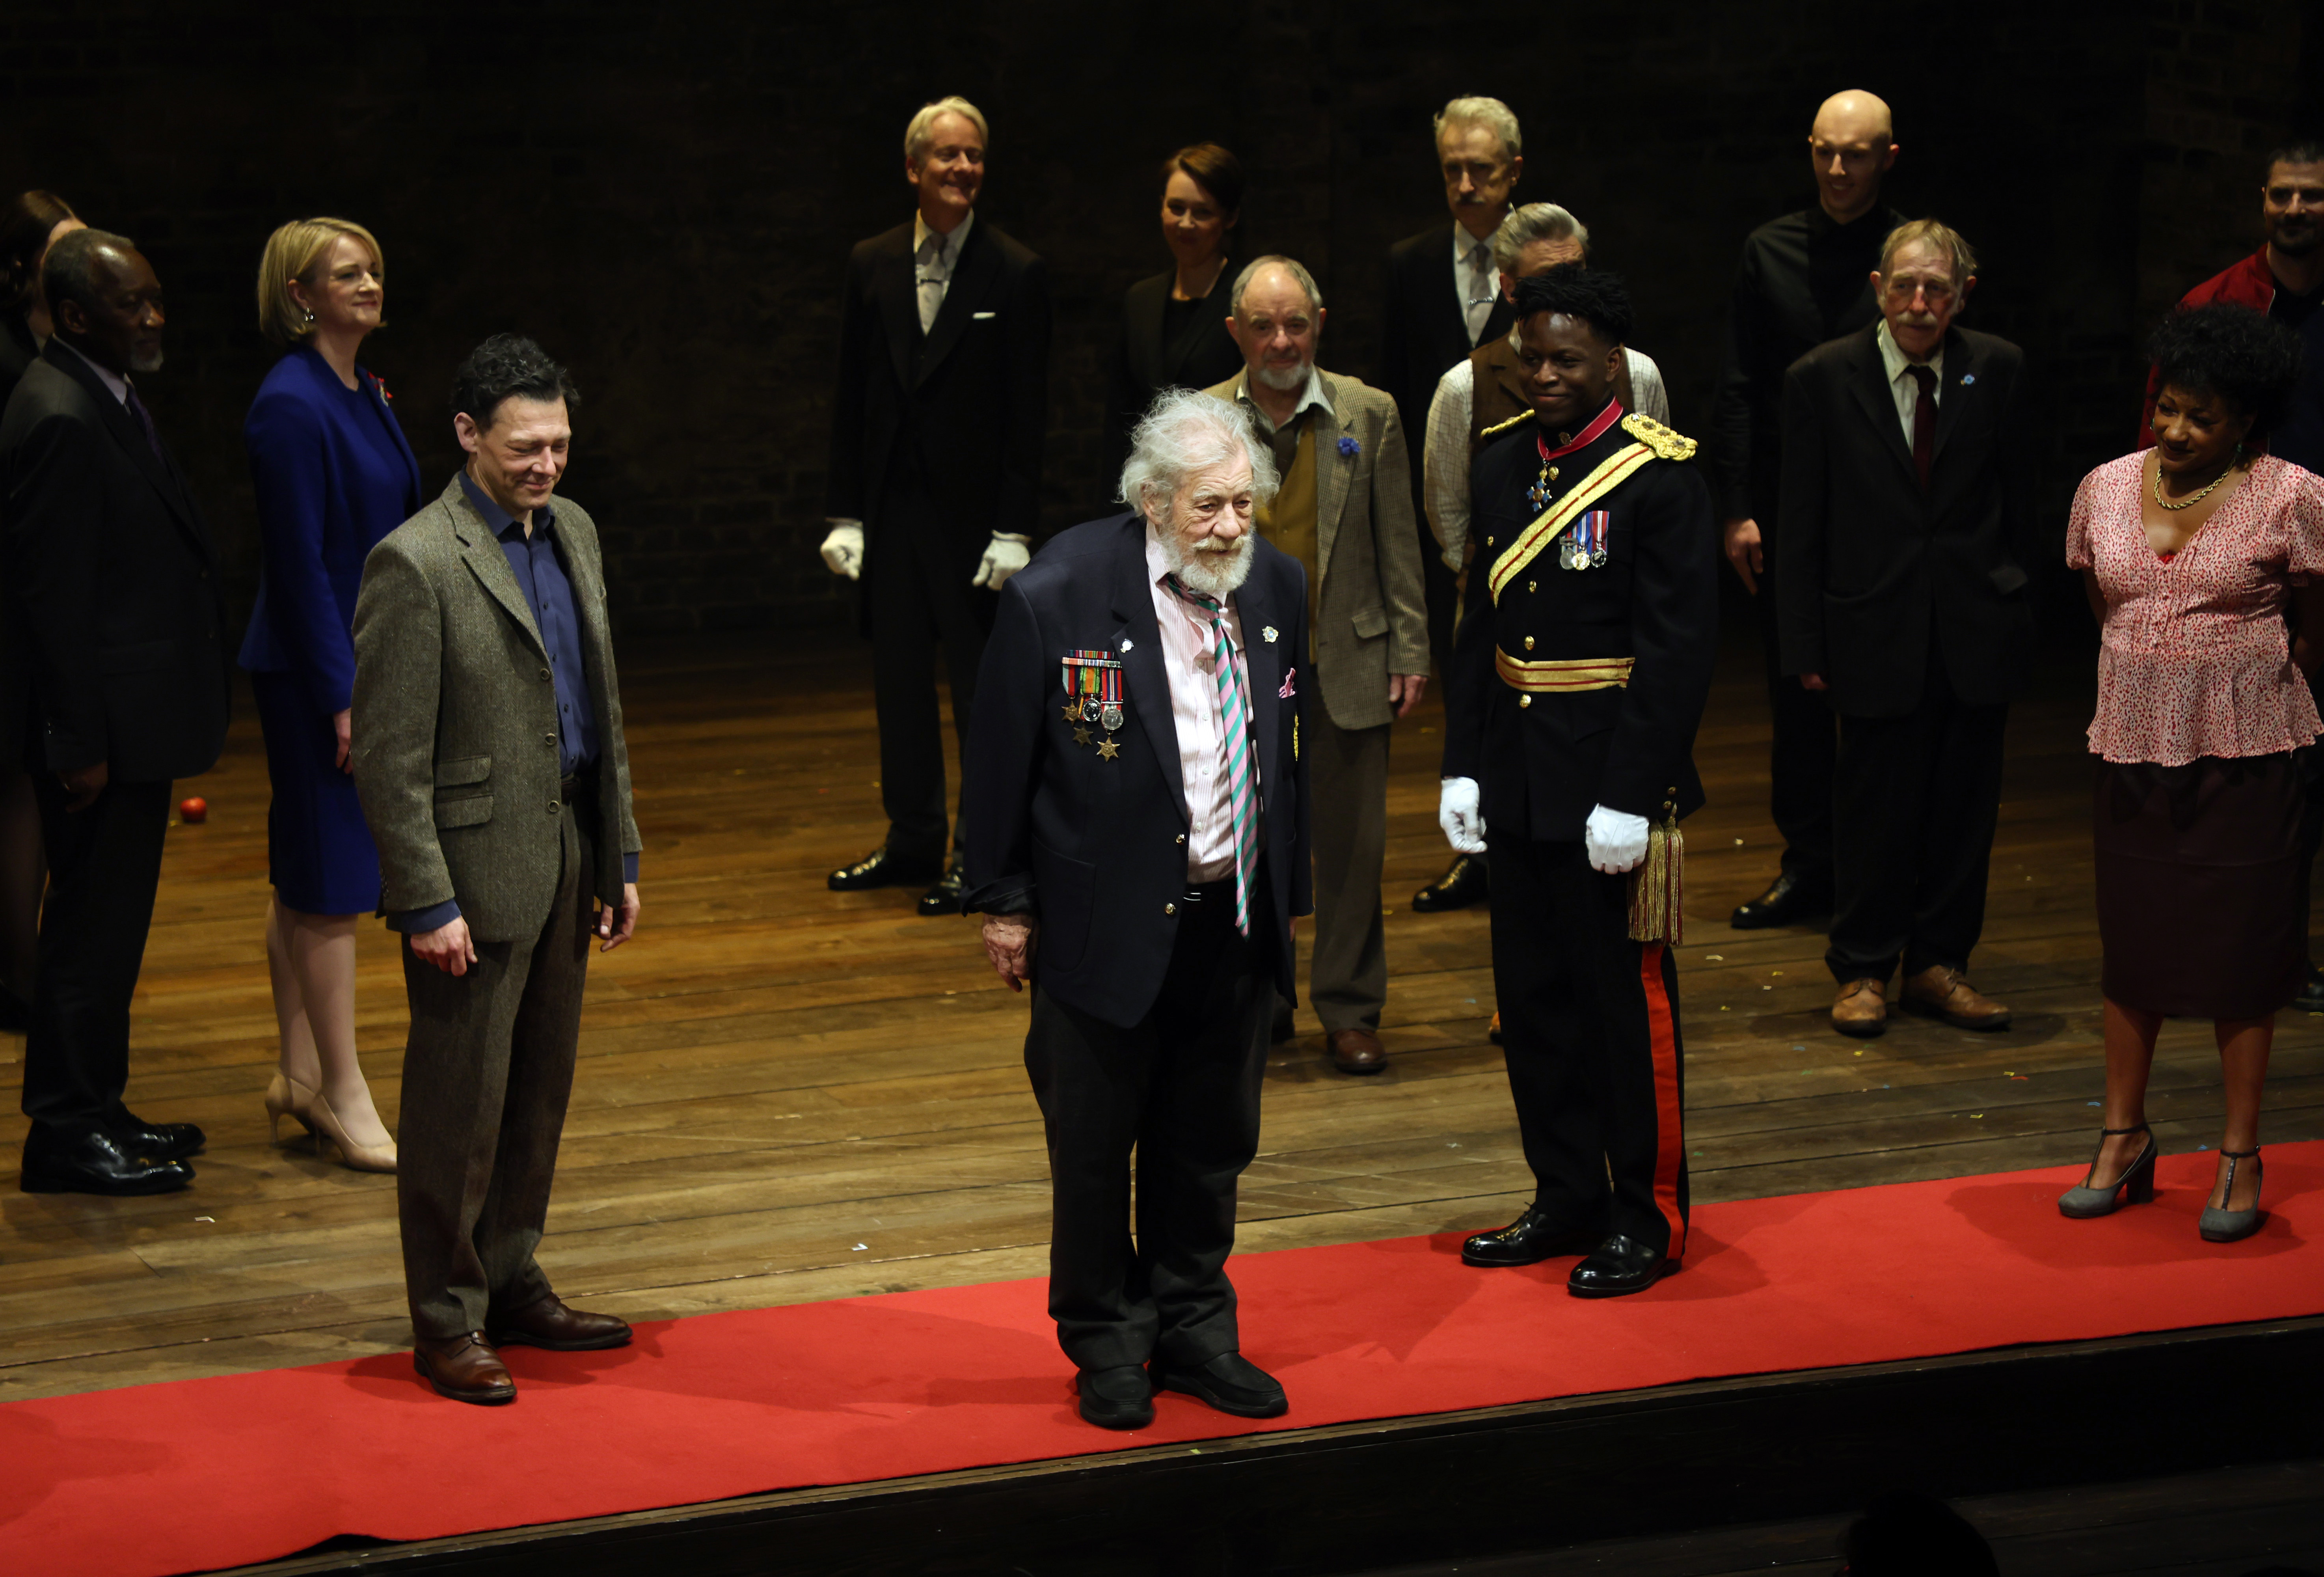 The 85-year-old actor plays John Falstaff in Player Kings at the Noël Coward theatre